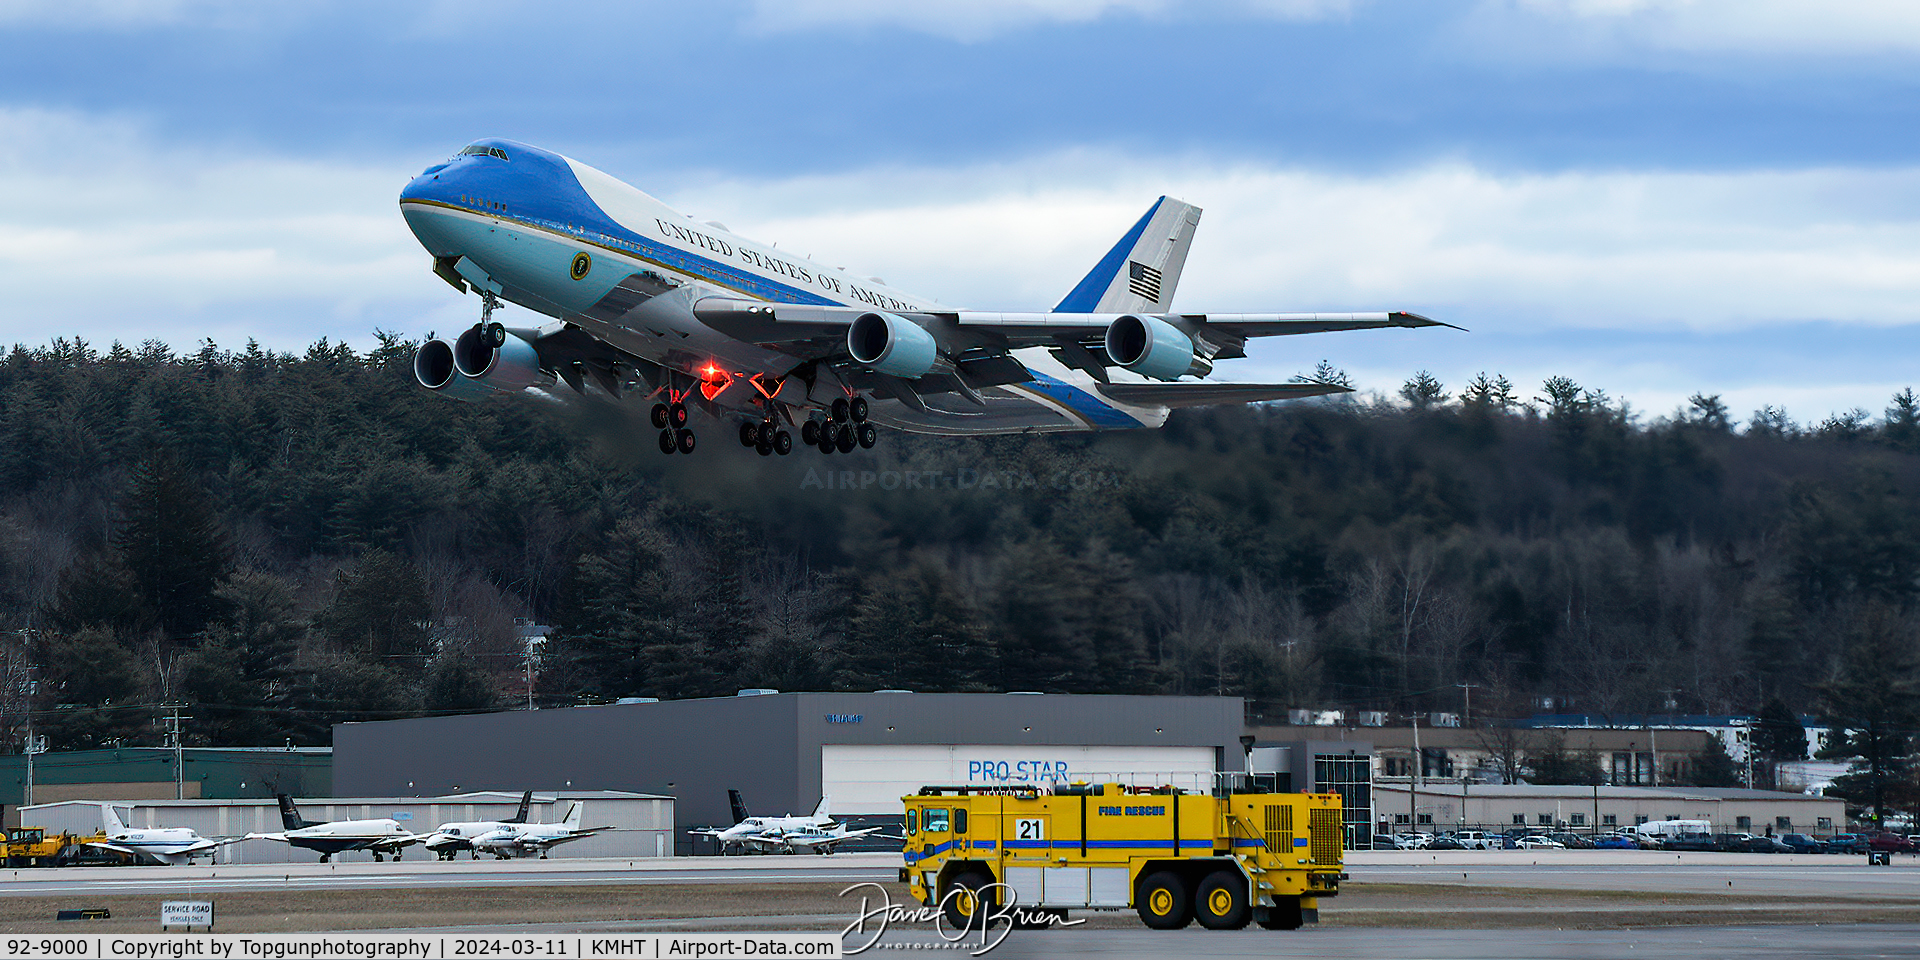 92-9000, 1987 Boeing VC-25A (747-2G4B) C/N 23825, Air Force One off the deck and heading back to ADW